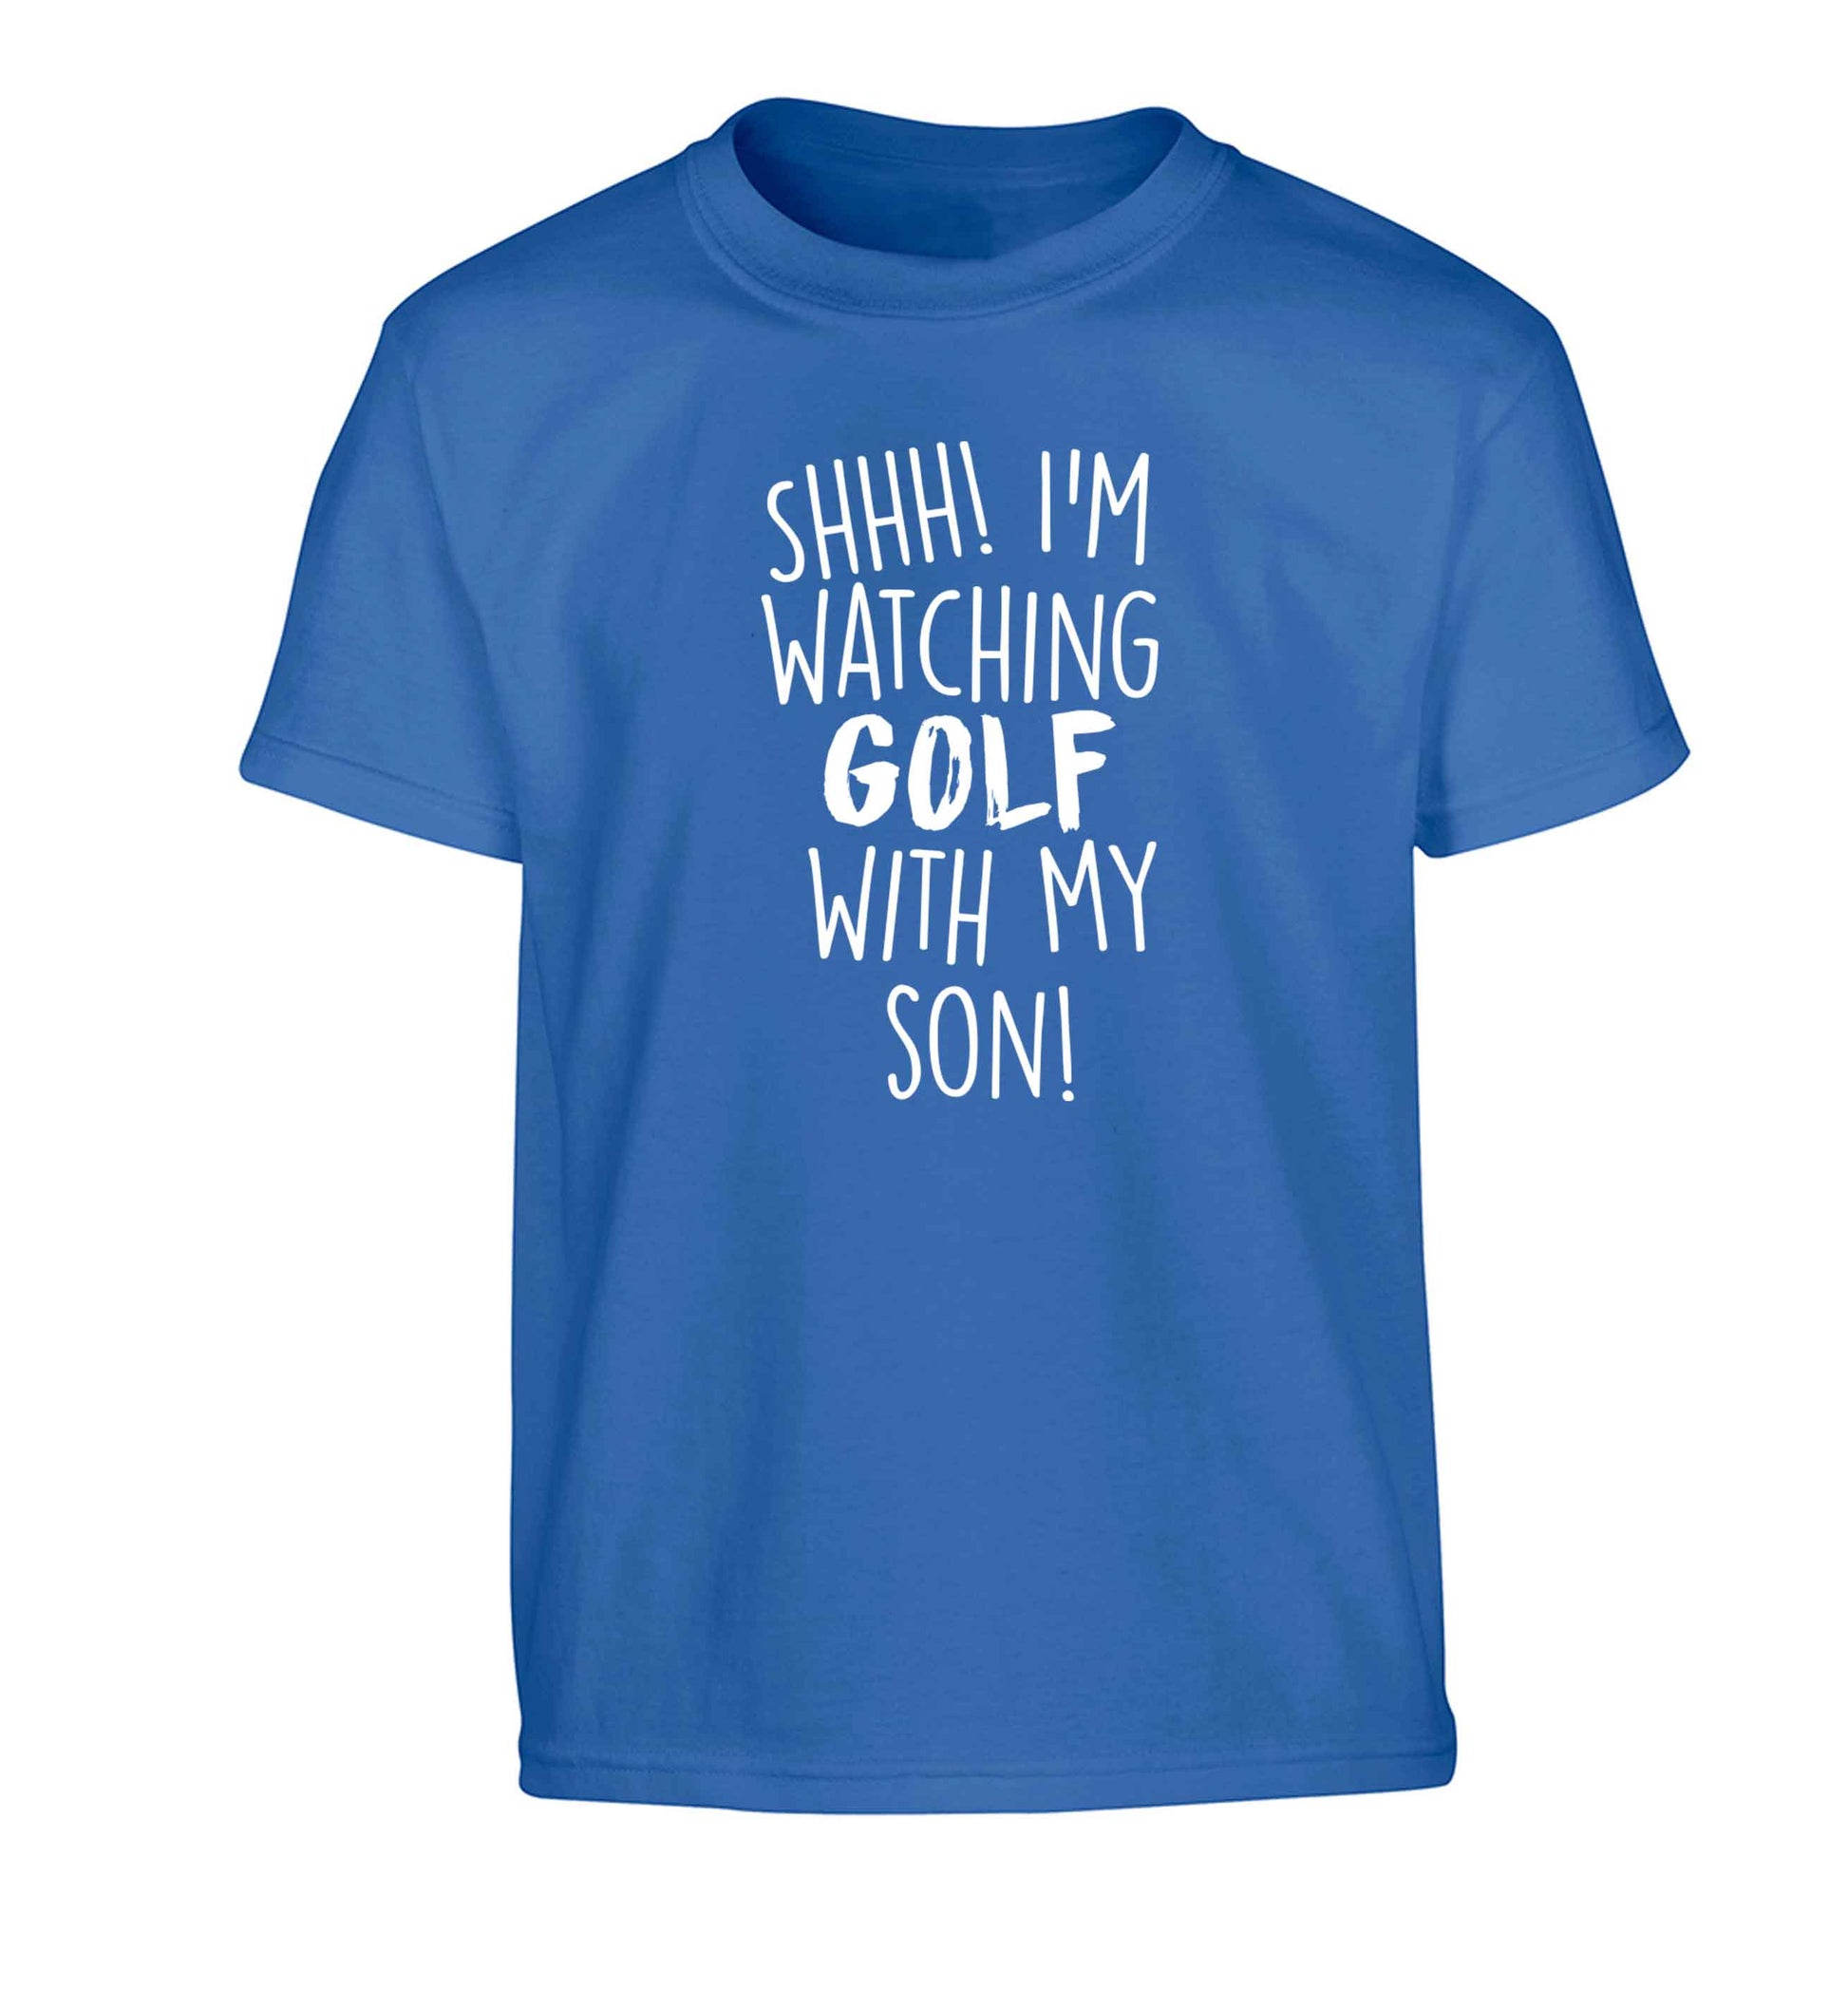 Shh I'm watching golf with my son Children's blue Tshirt 12-13 Years